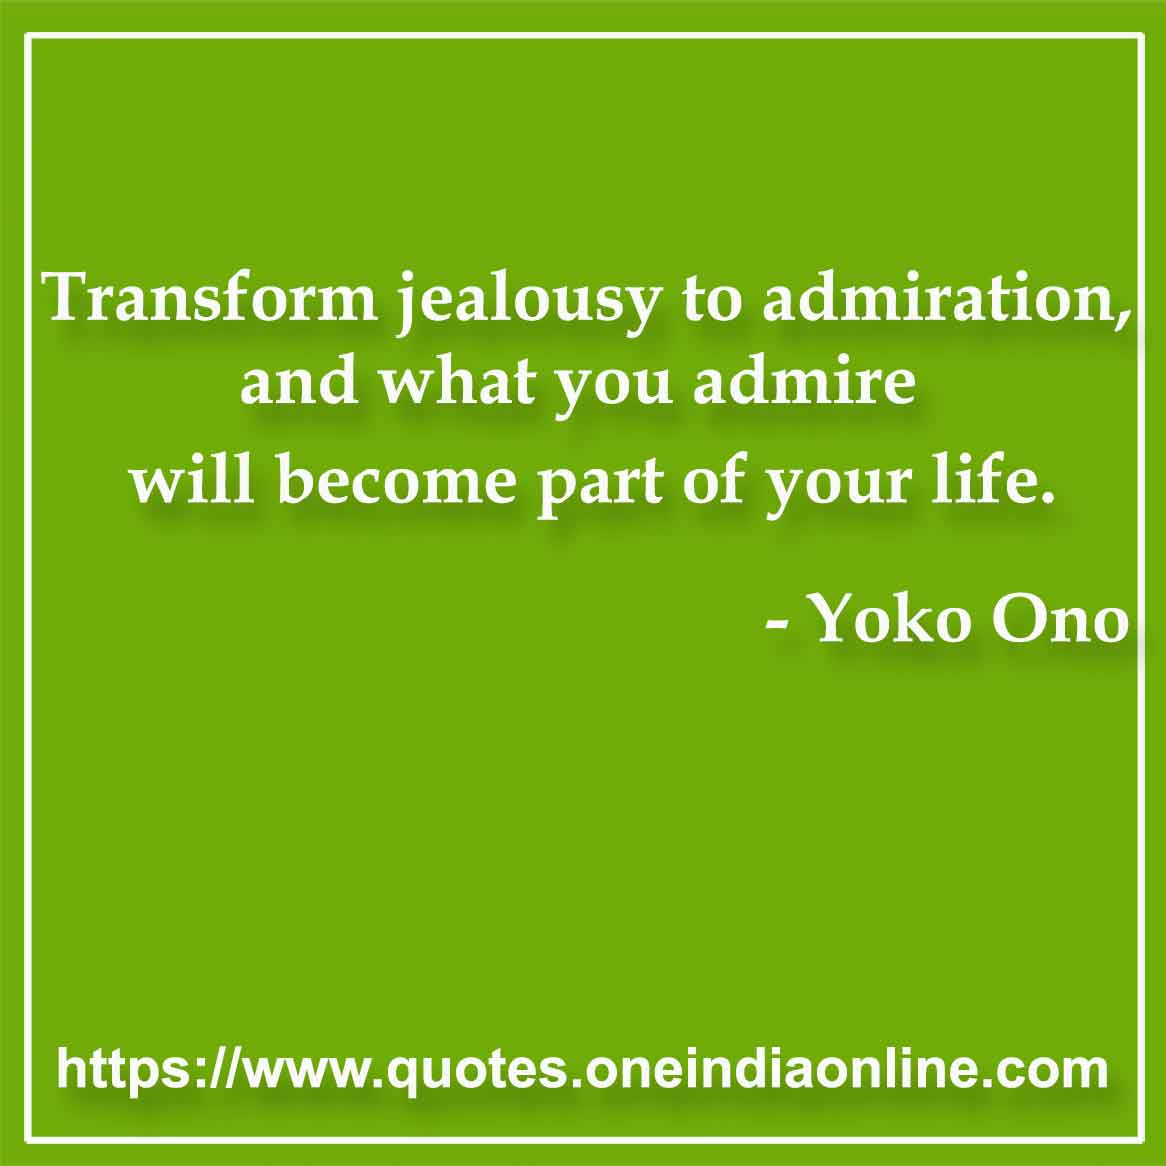 Transform jealousy to admiration, and what you admire will become part of your life. 

- Admiration Quotes by Yoko Ono